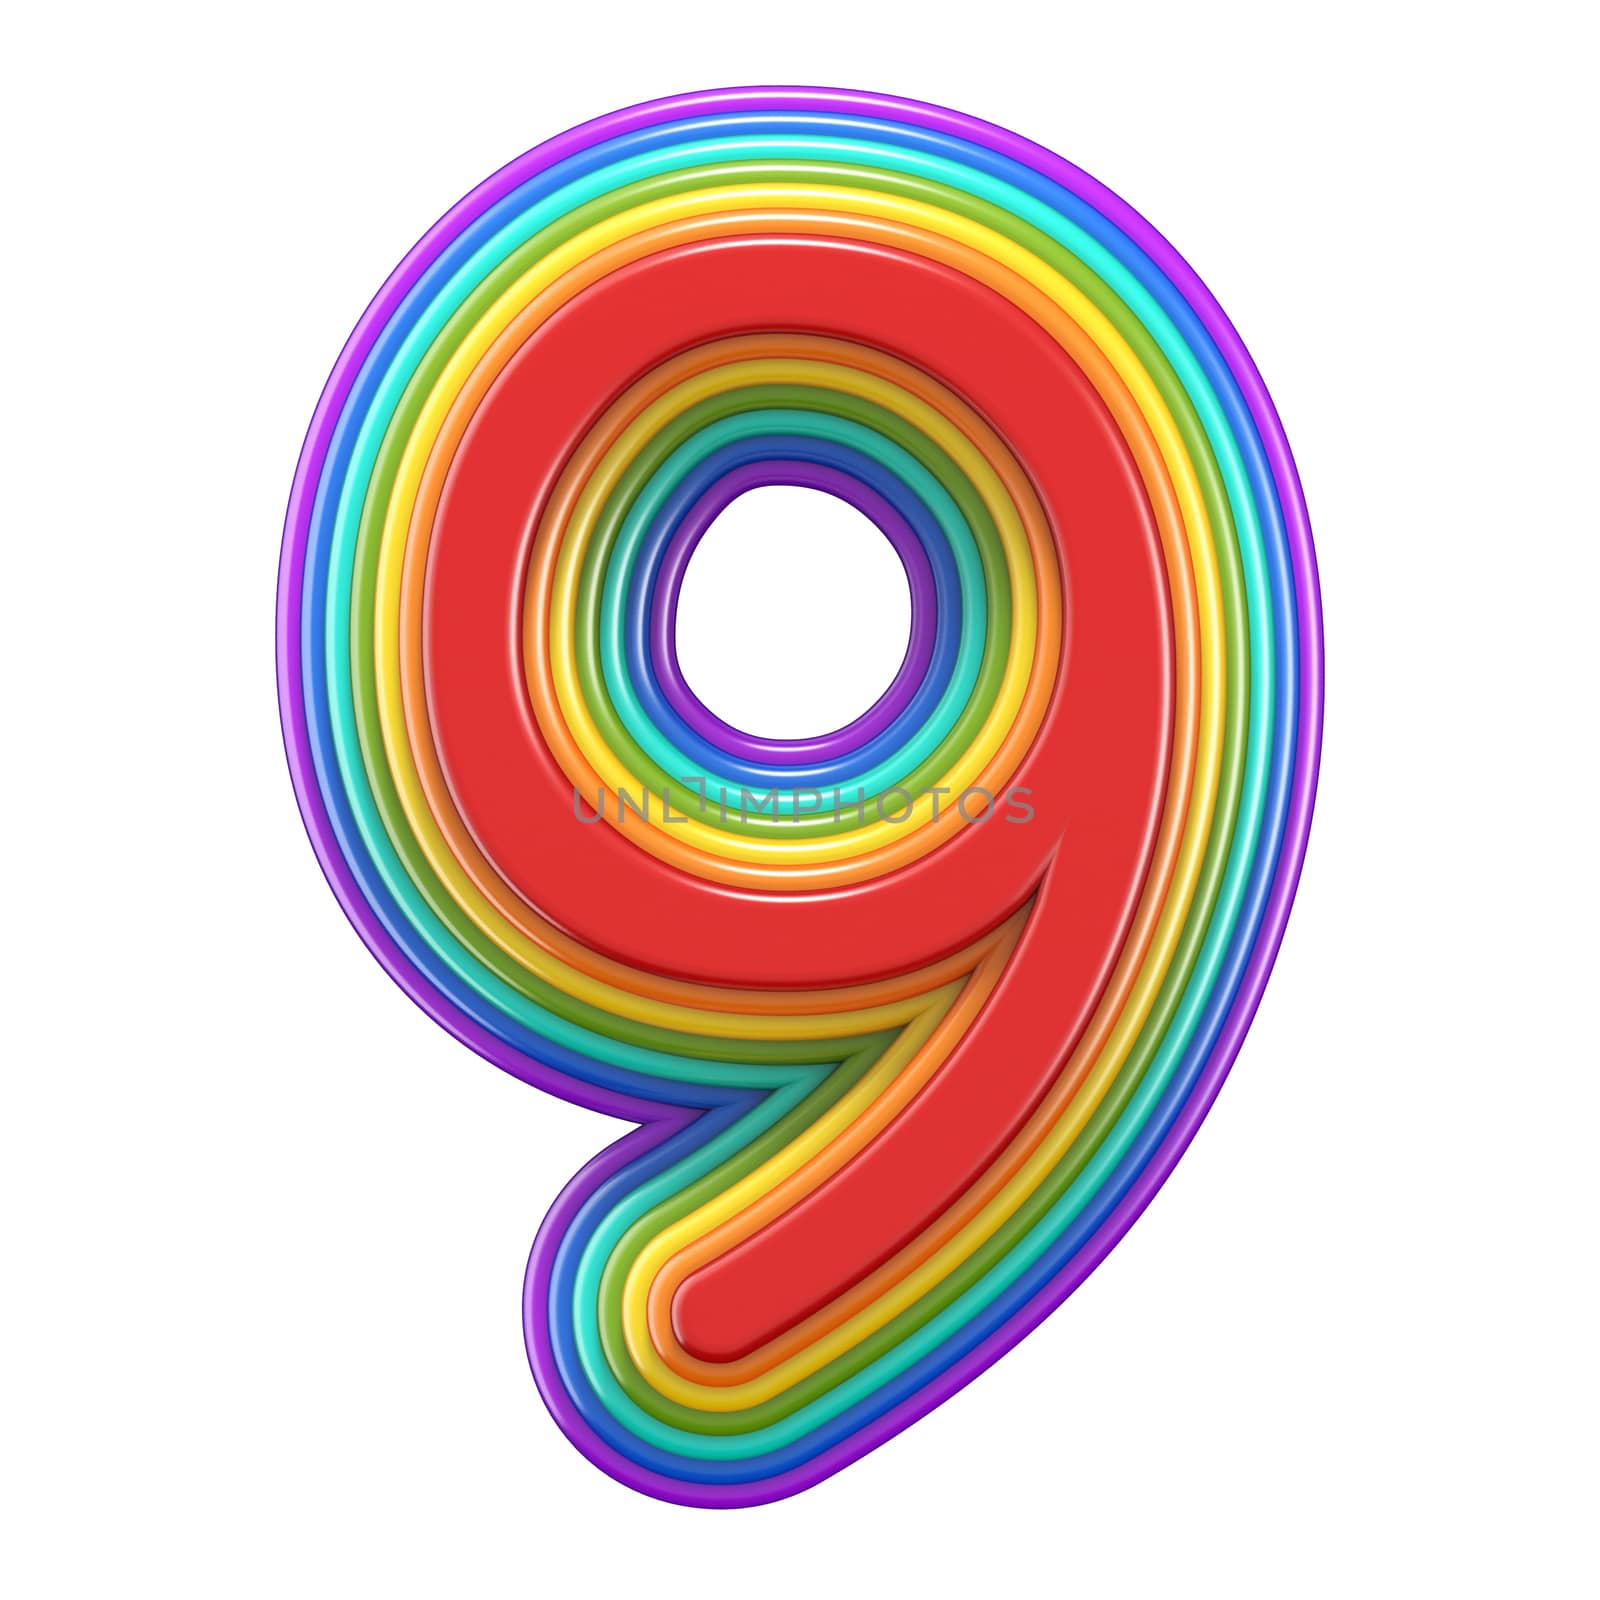 Concentric rainbow number 9 NINE 3D rendering illustration isolated on white background